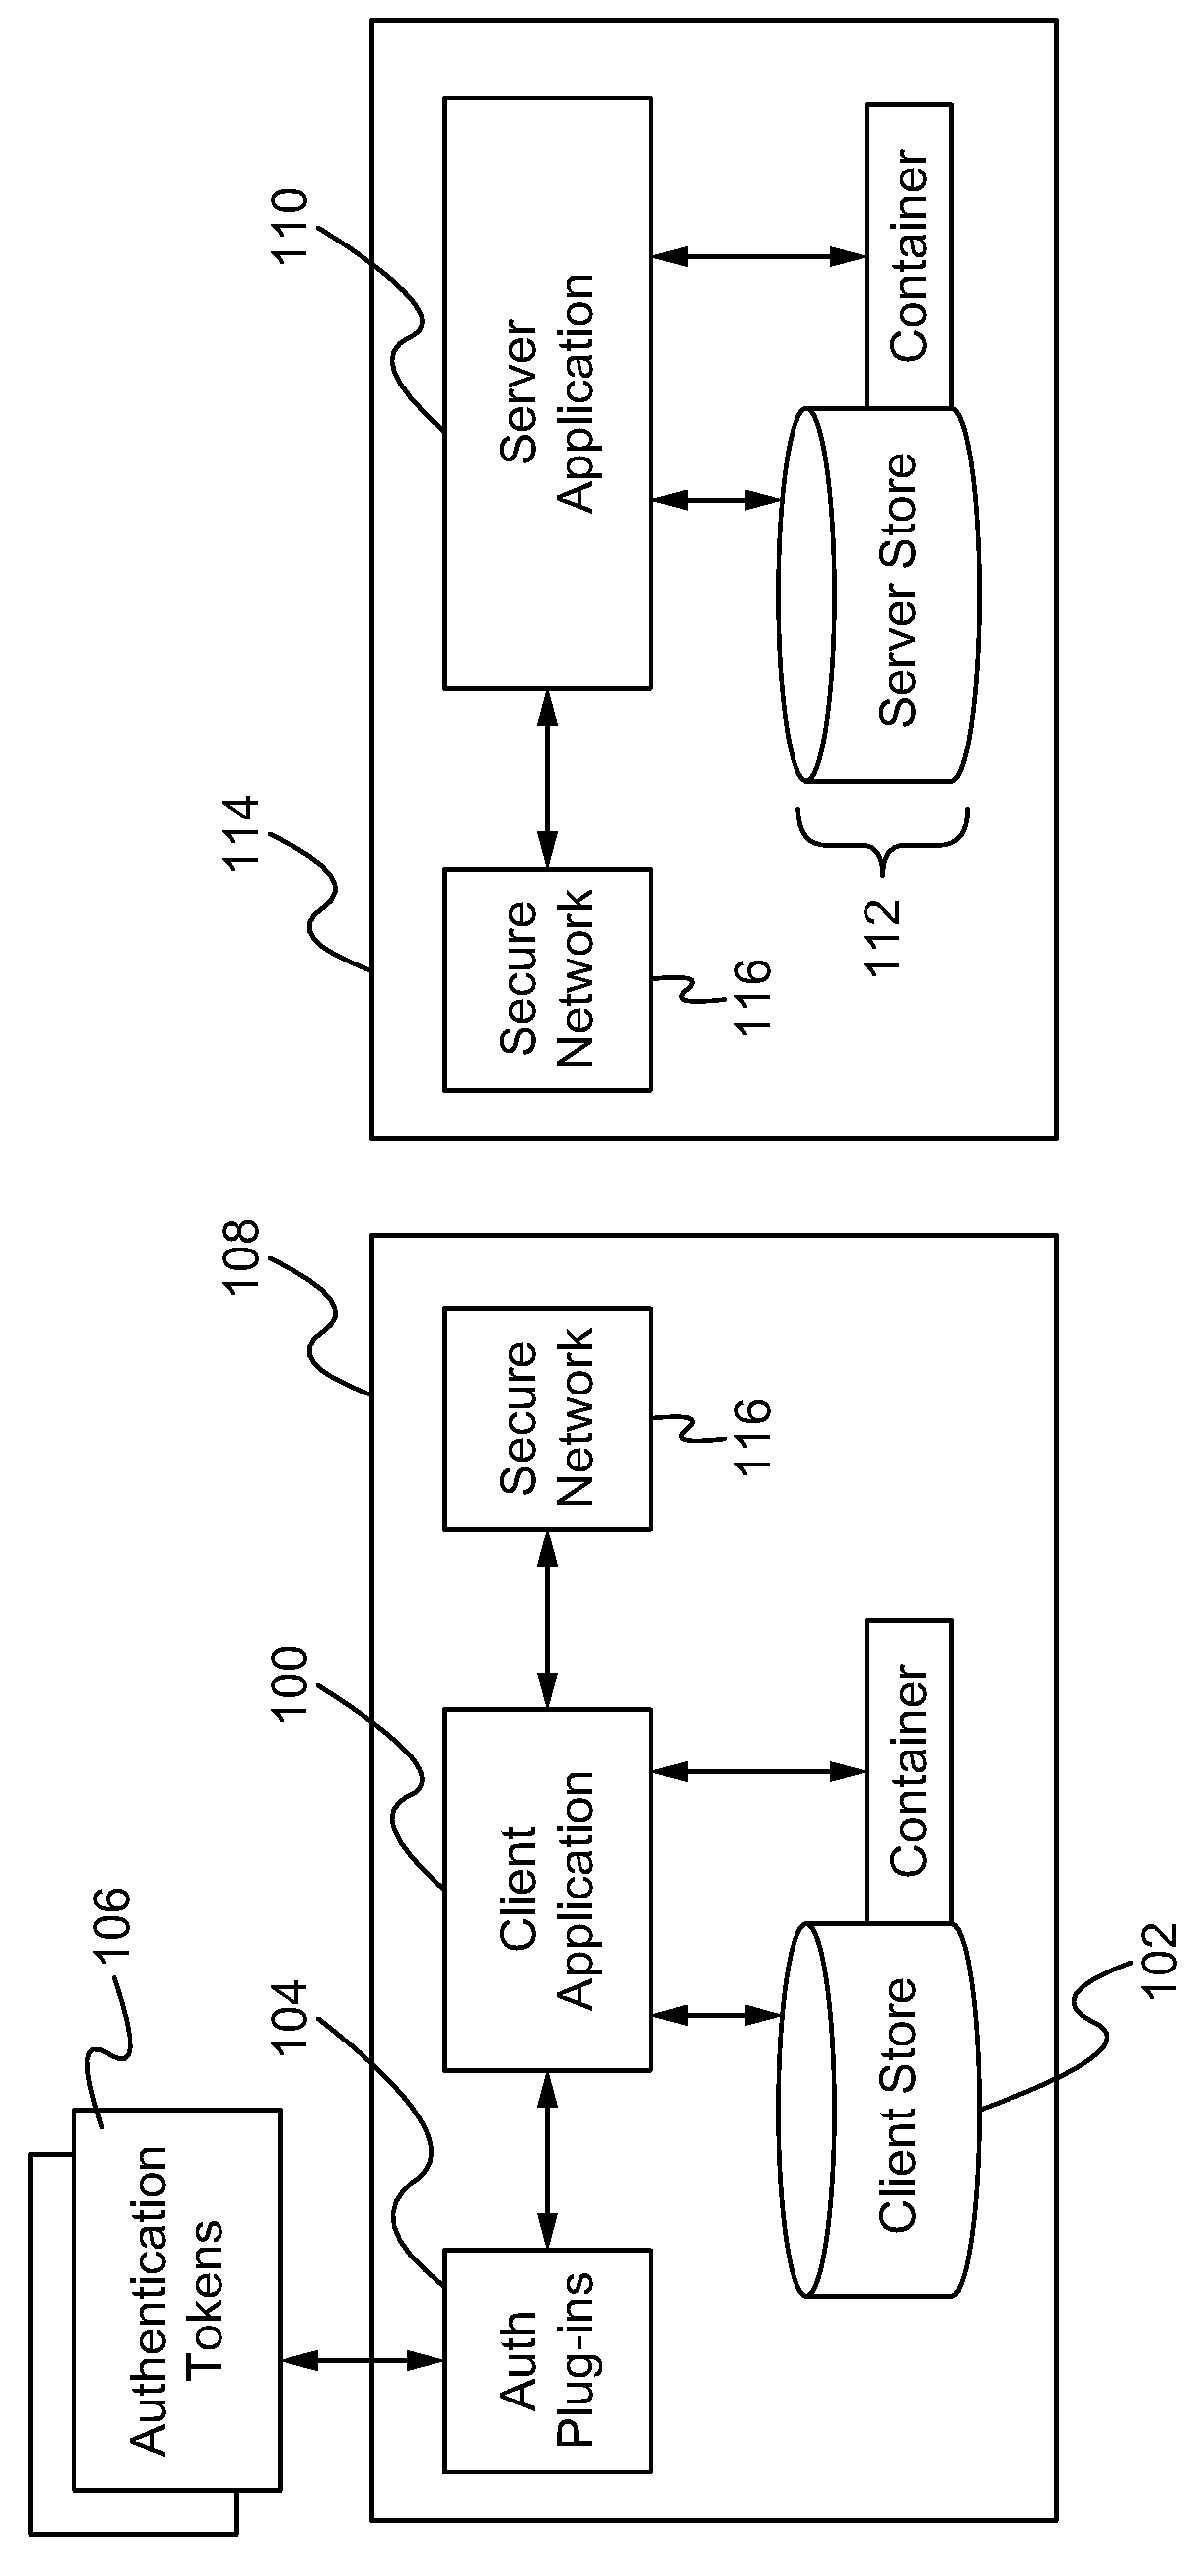 System and associated software for providing advanced data protections in a defense-in-depth system by integrating multi-factor authentication with cryptographic offloading